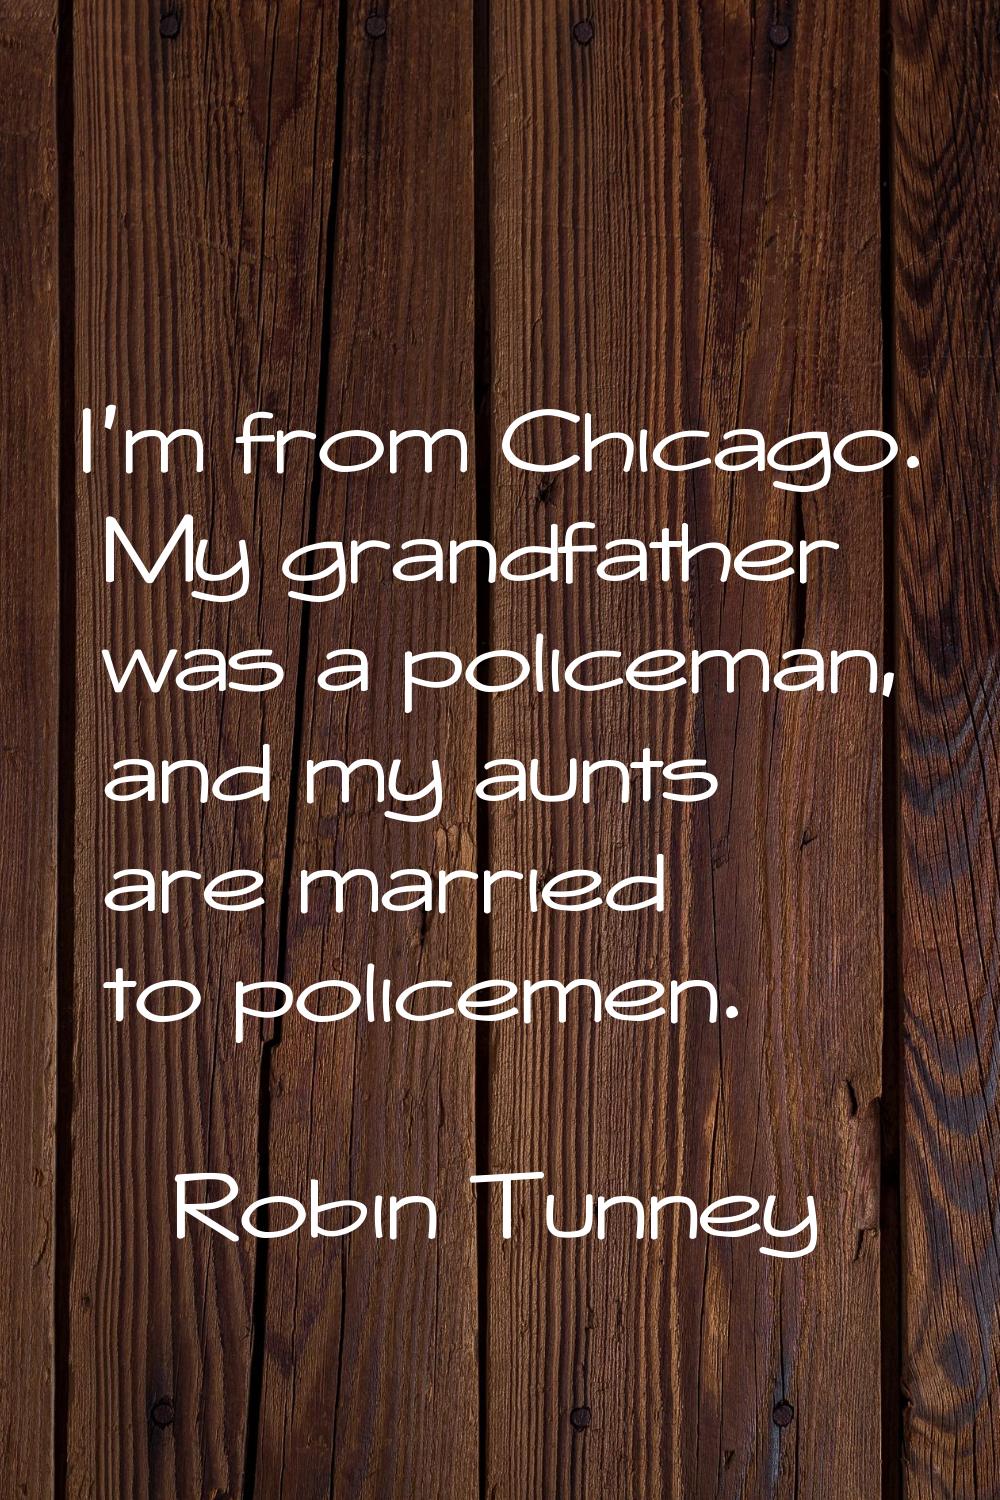 I'm from Chicago. My grandfather was a policeman, and my aunts are married to policemen.